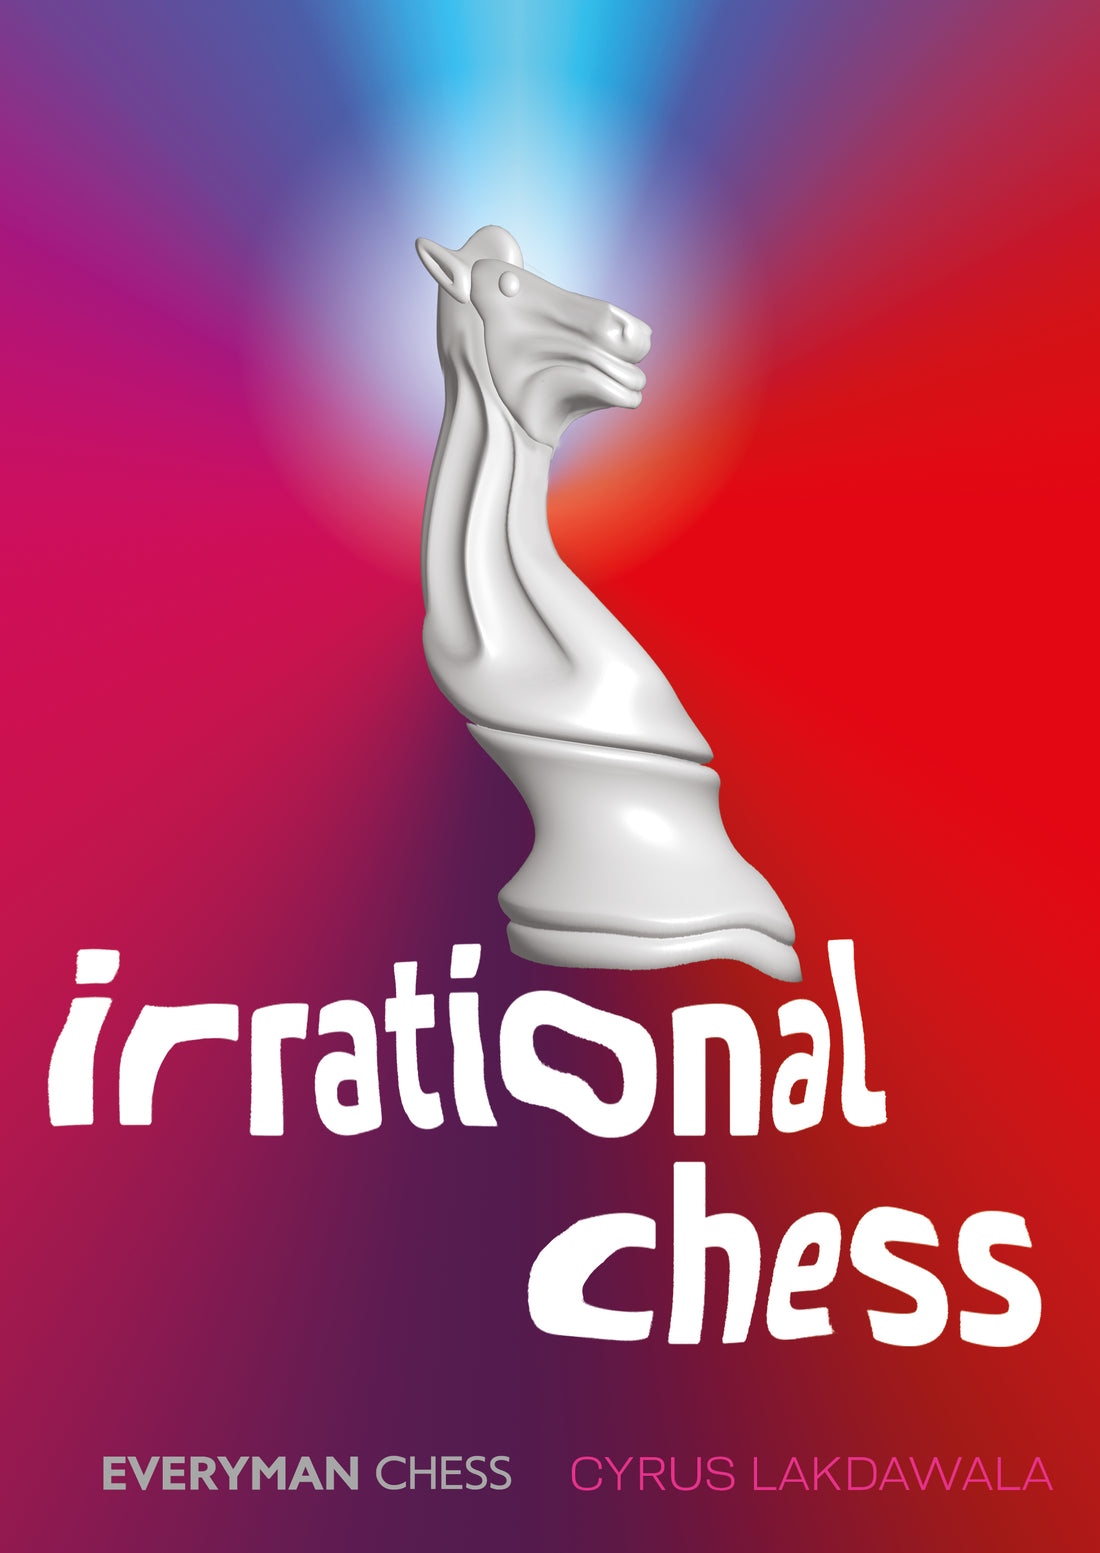 Irrational Chess